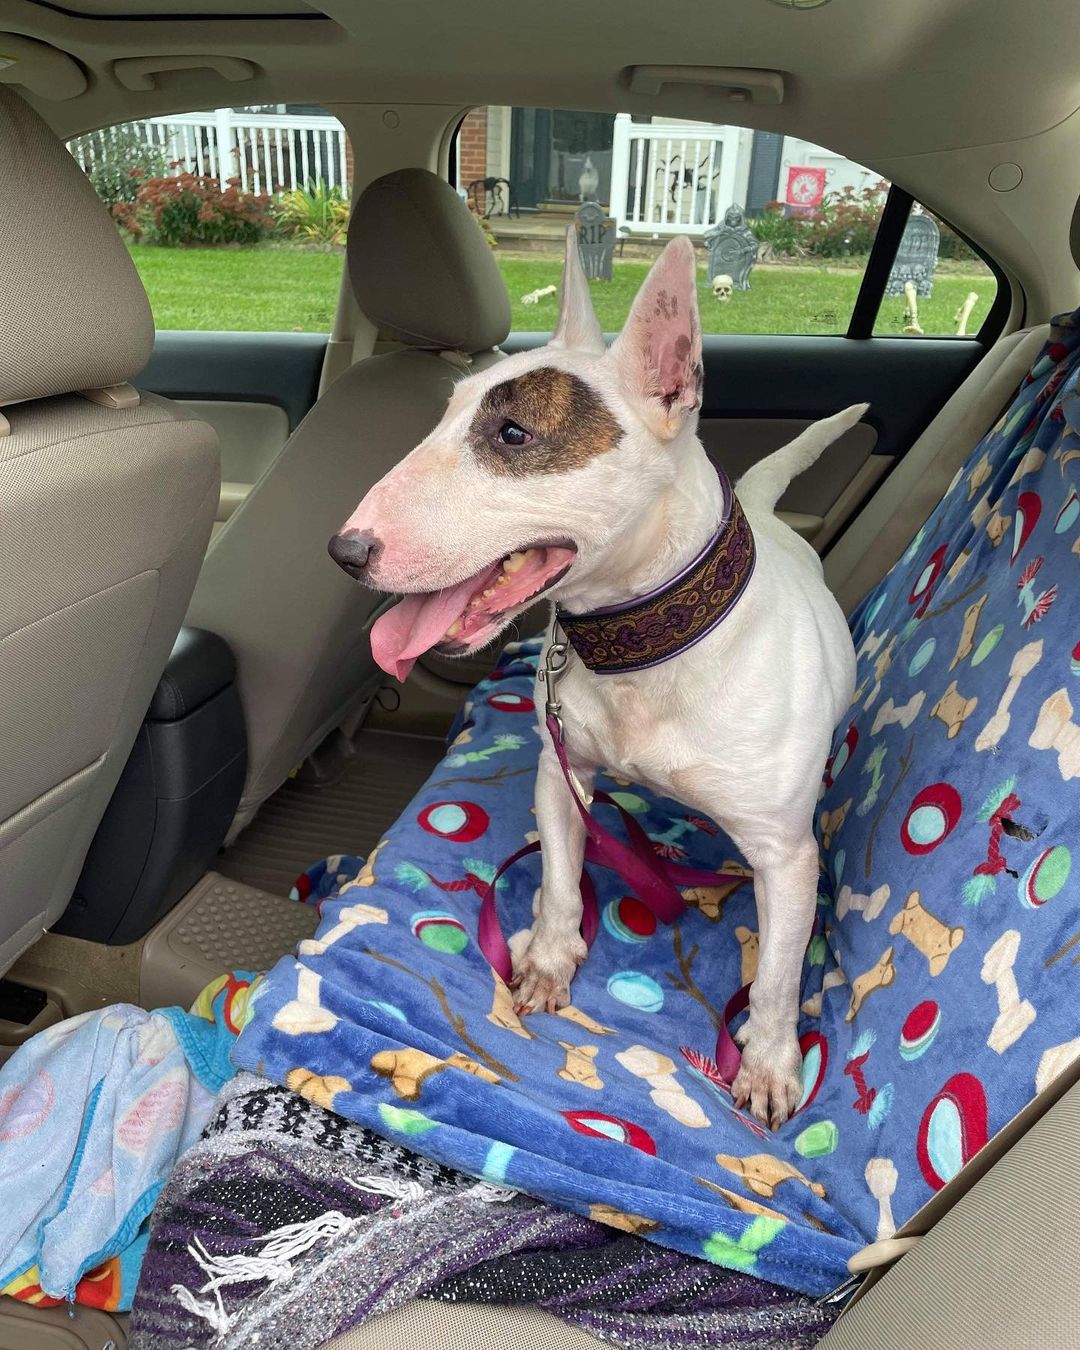 Another day another <a target='_blank' href='https://www.instagram.com/explore/tags/winterintakesarecoming/'>#winterintakesarecoming</a> gets her ride to a new home. Sweet senior girl Dolce starts her transport to veteran foster and rescue alumn Jordanna. She’ll have a couple 2 legged and one 4 legged sibling to hang out with and be appropriately spoiled. Stay tuned 🙏🏼 <a target='_blank' href='https://www.instagram.com/explore/tags/ittakesavillage/'>#ittakesavillage</a> <a target='_blank' href='https://www.instagram.com/explore/tags/bullterrierrescue/'>#bullterrierrescue</a>